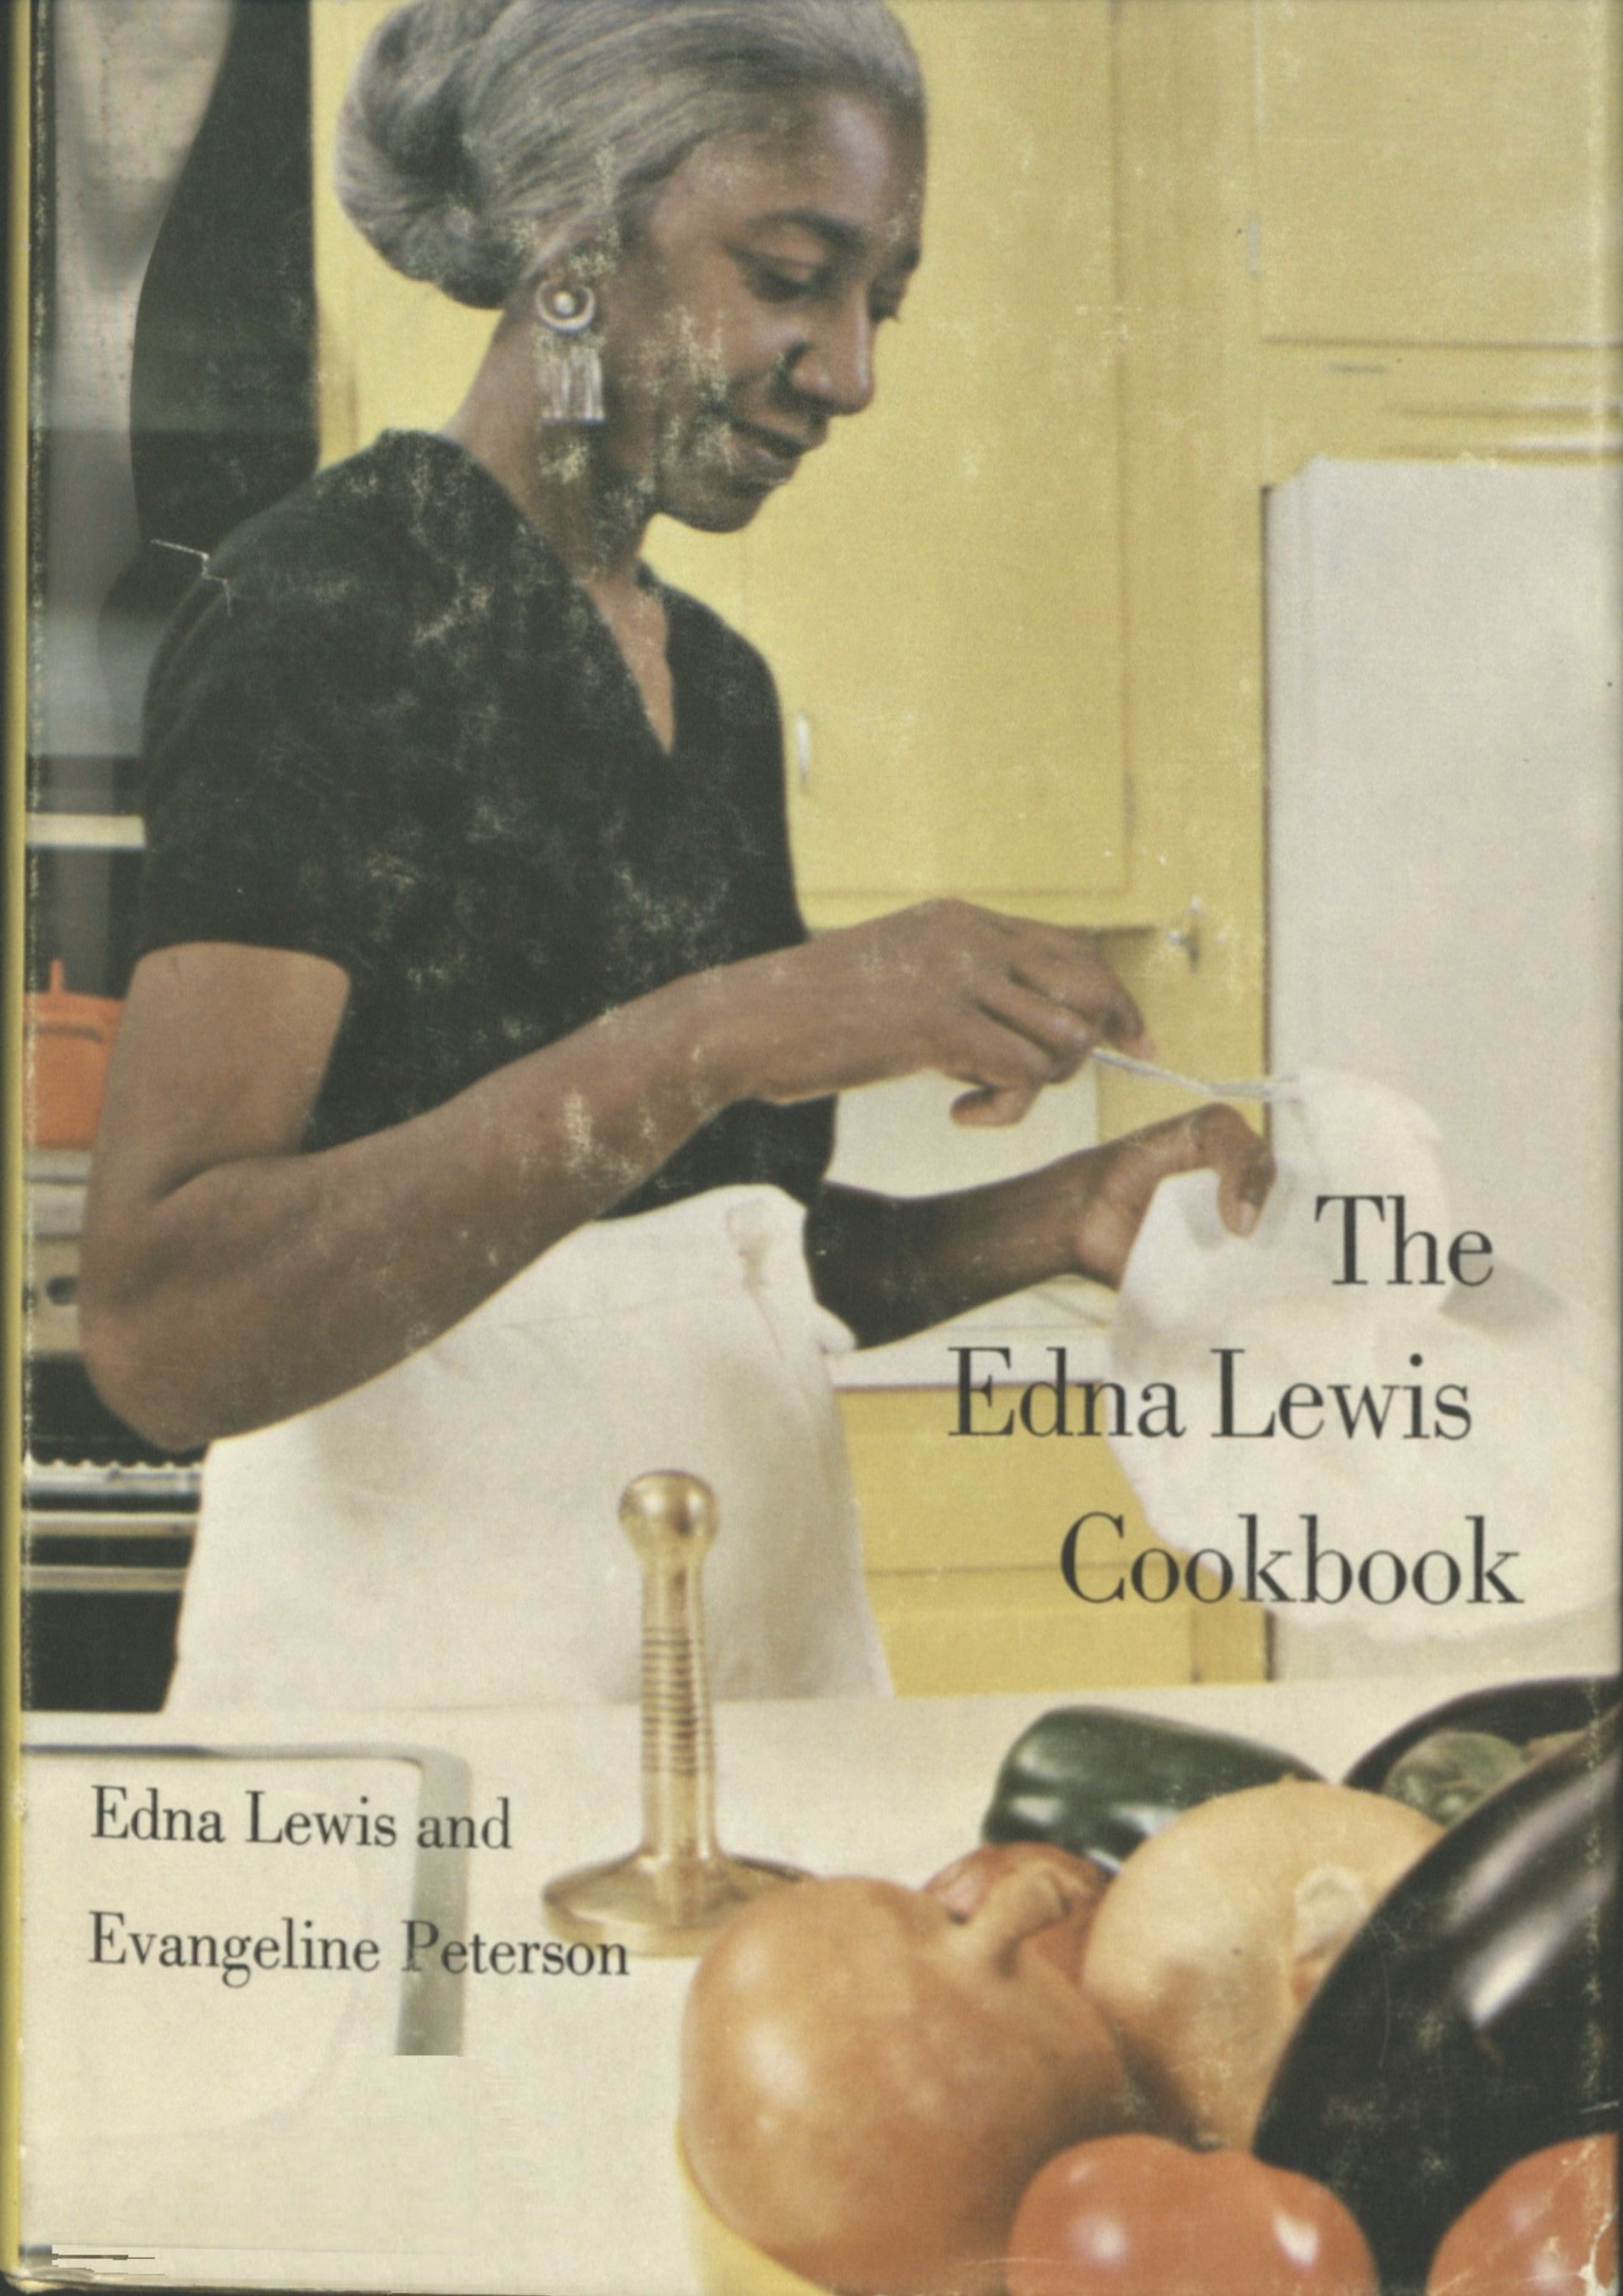 Cover of "The Edna Lewis Cookbook" (1972)